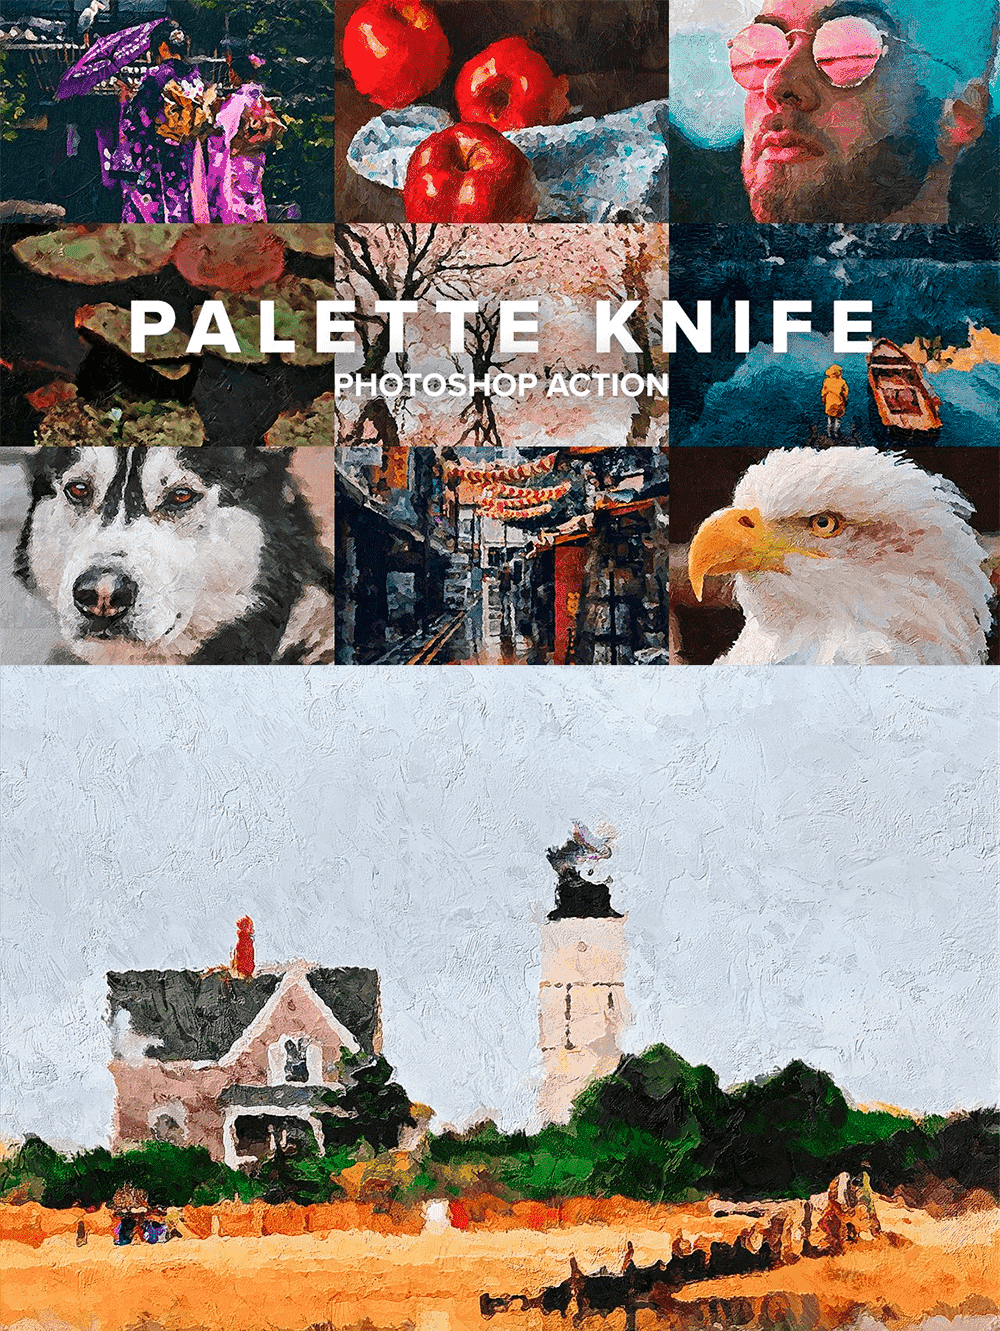 Palette knife photoshop action, picture for pinterest.